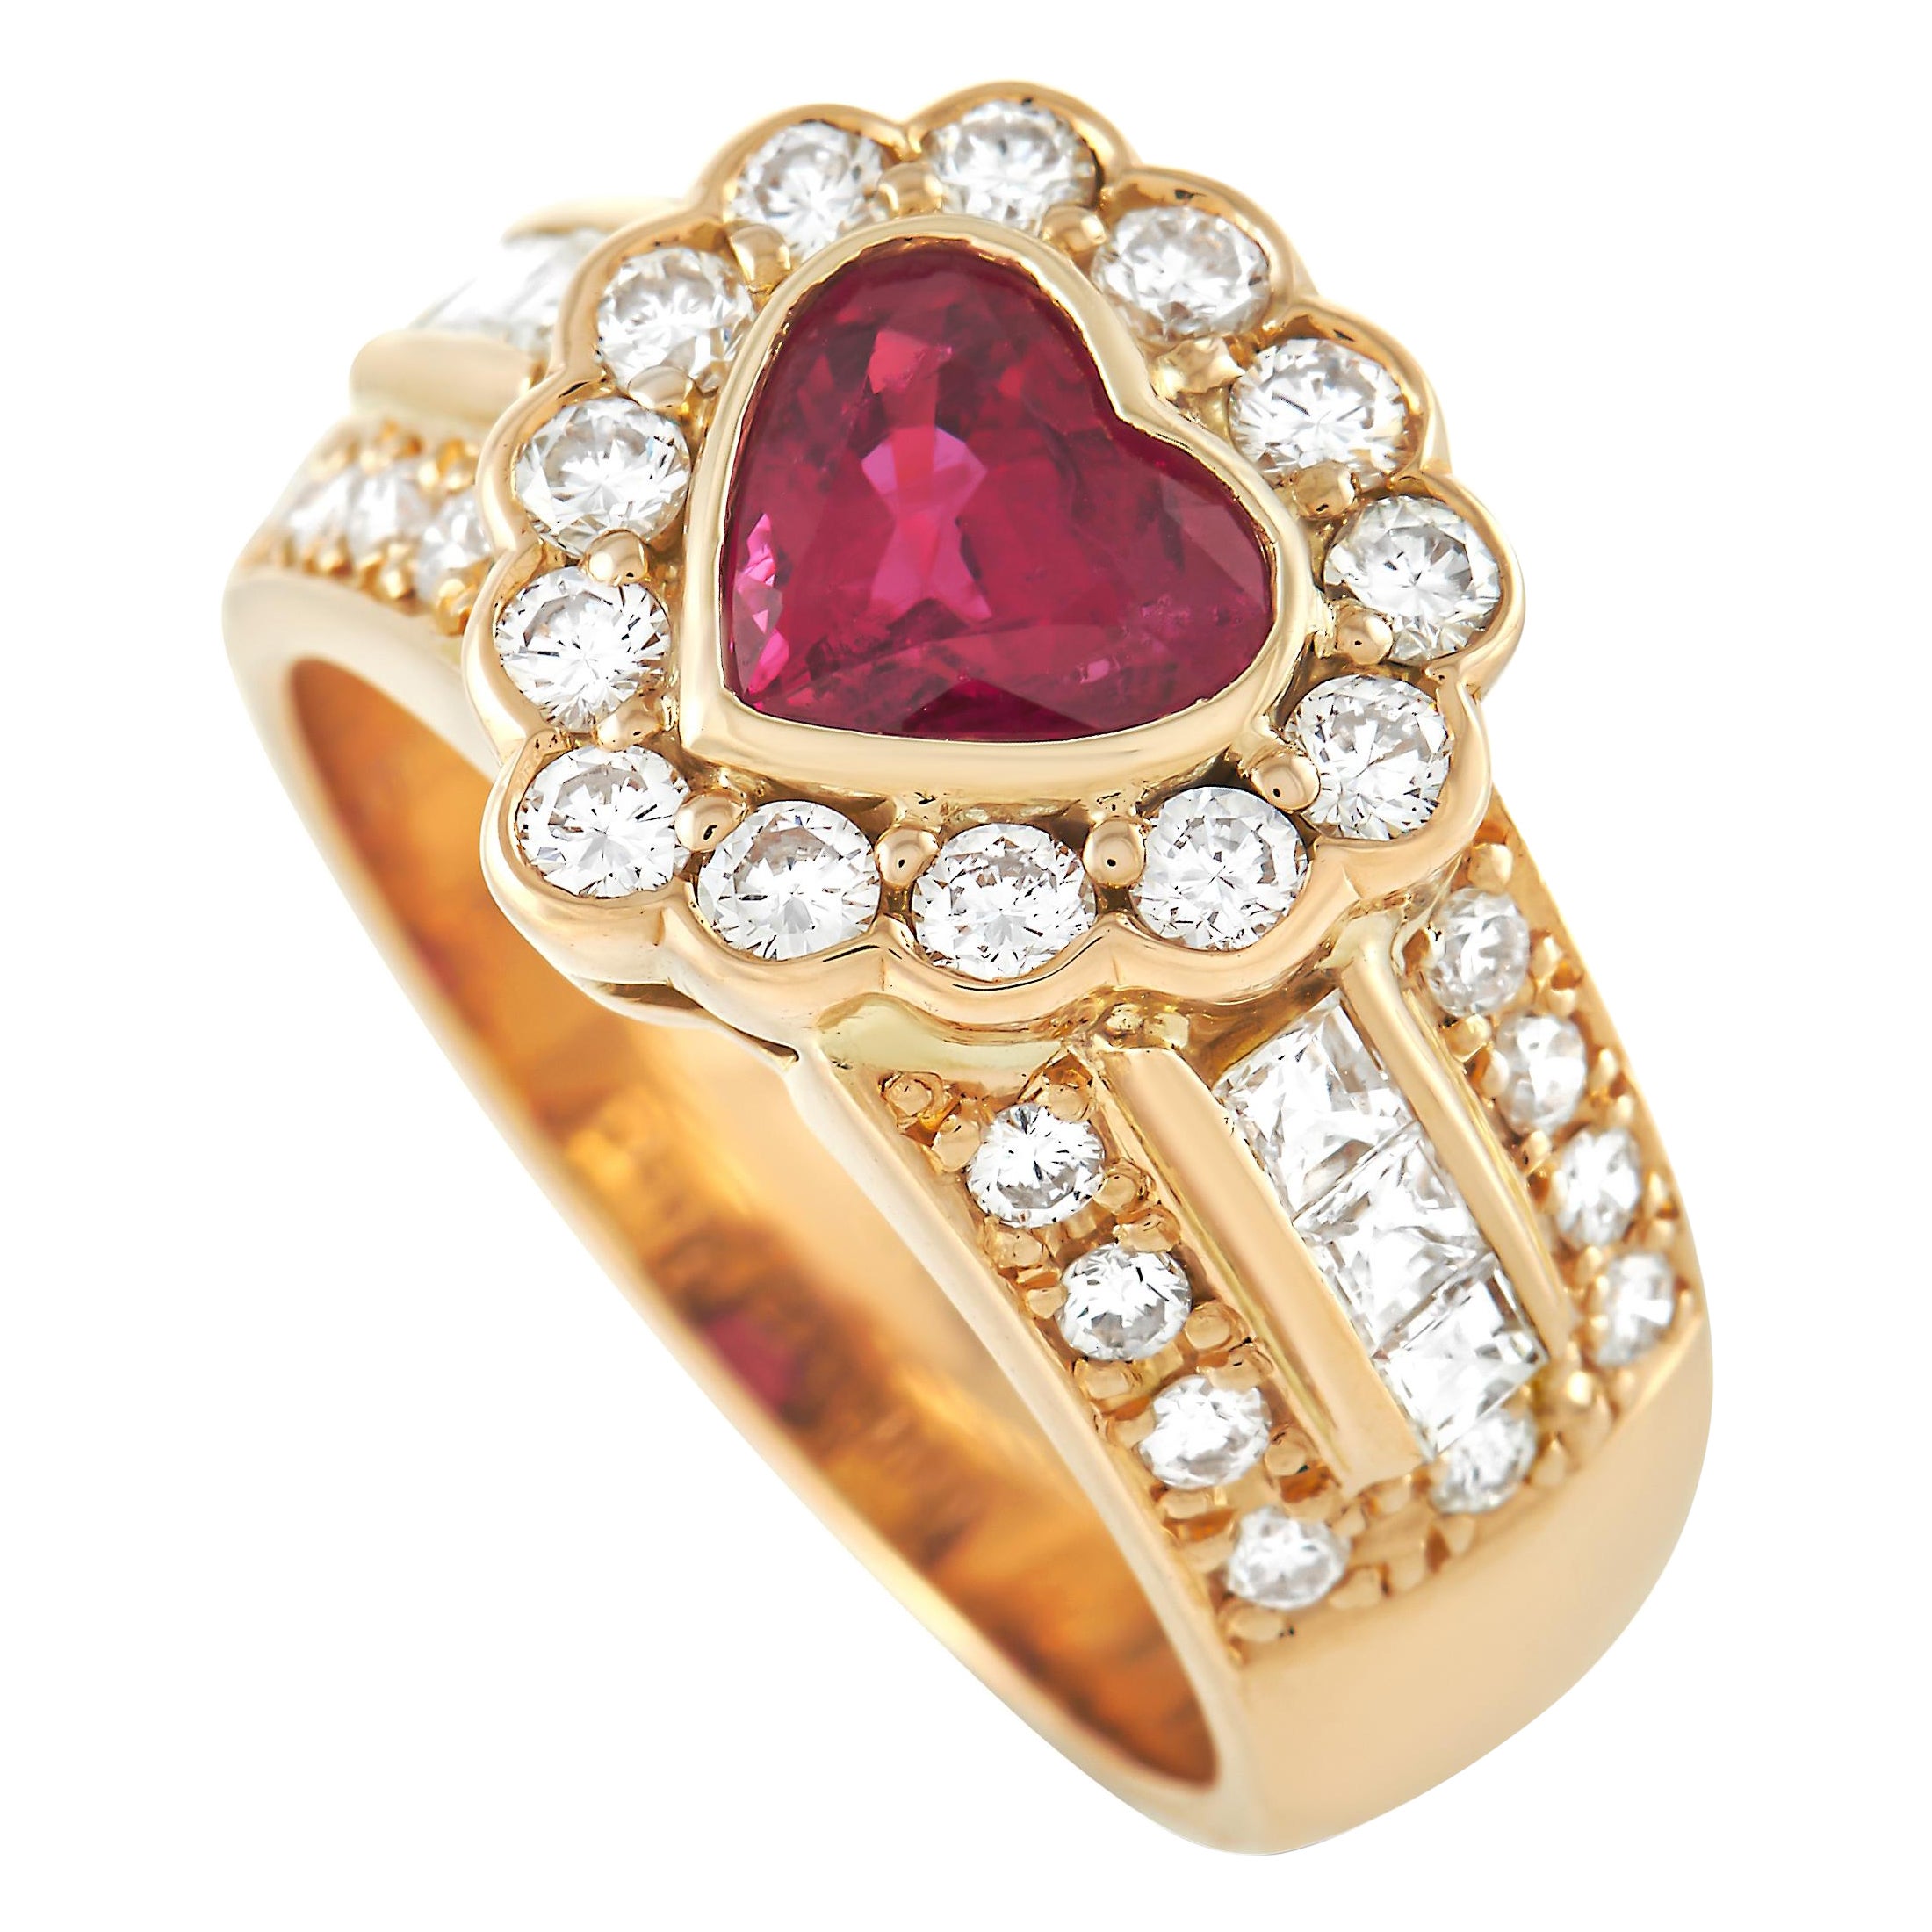 LB Exclusive 18K Yellow Gold 0.92 Ct Diamond and 1.17 Ct Ruby Heart Ring